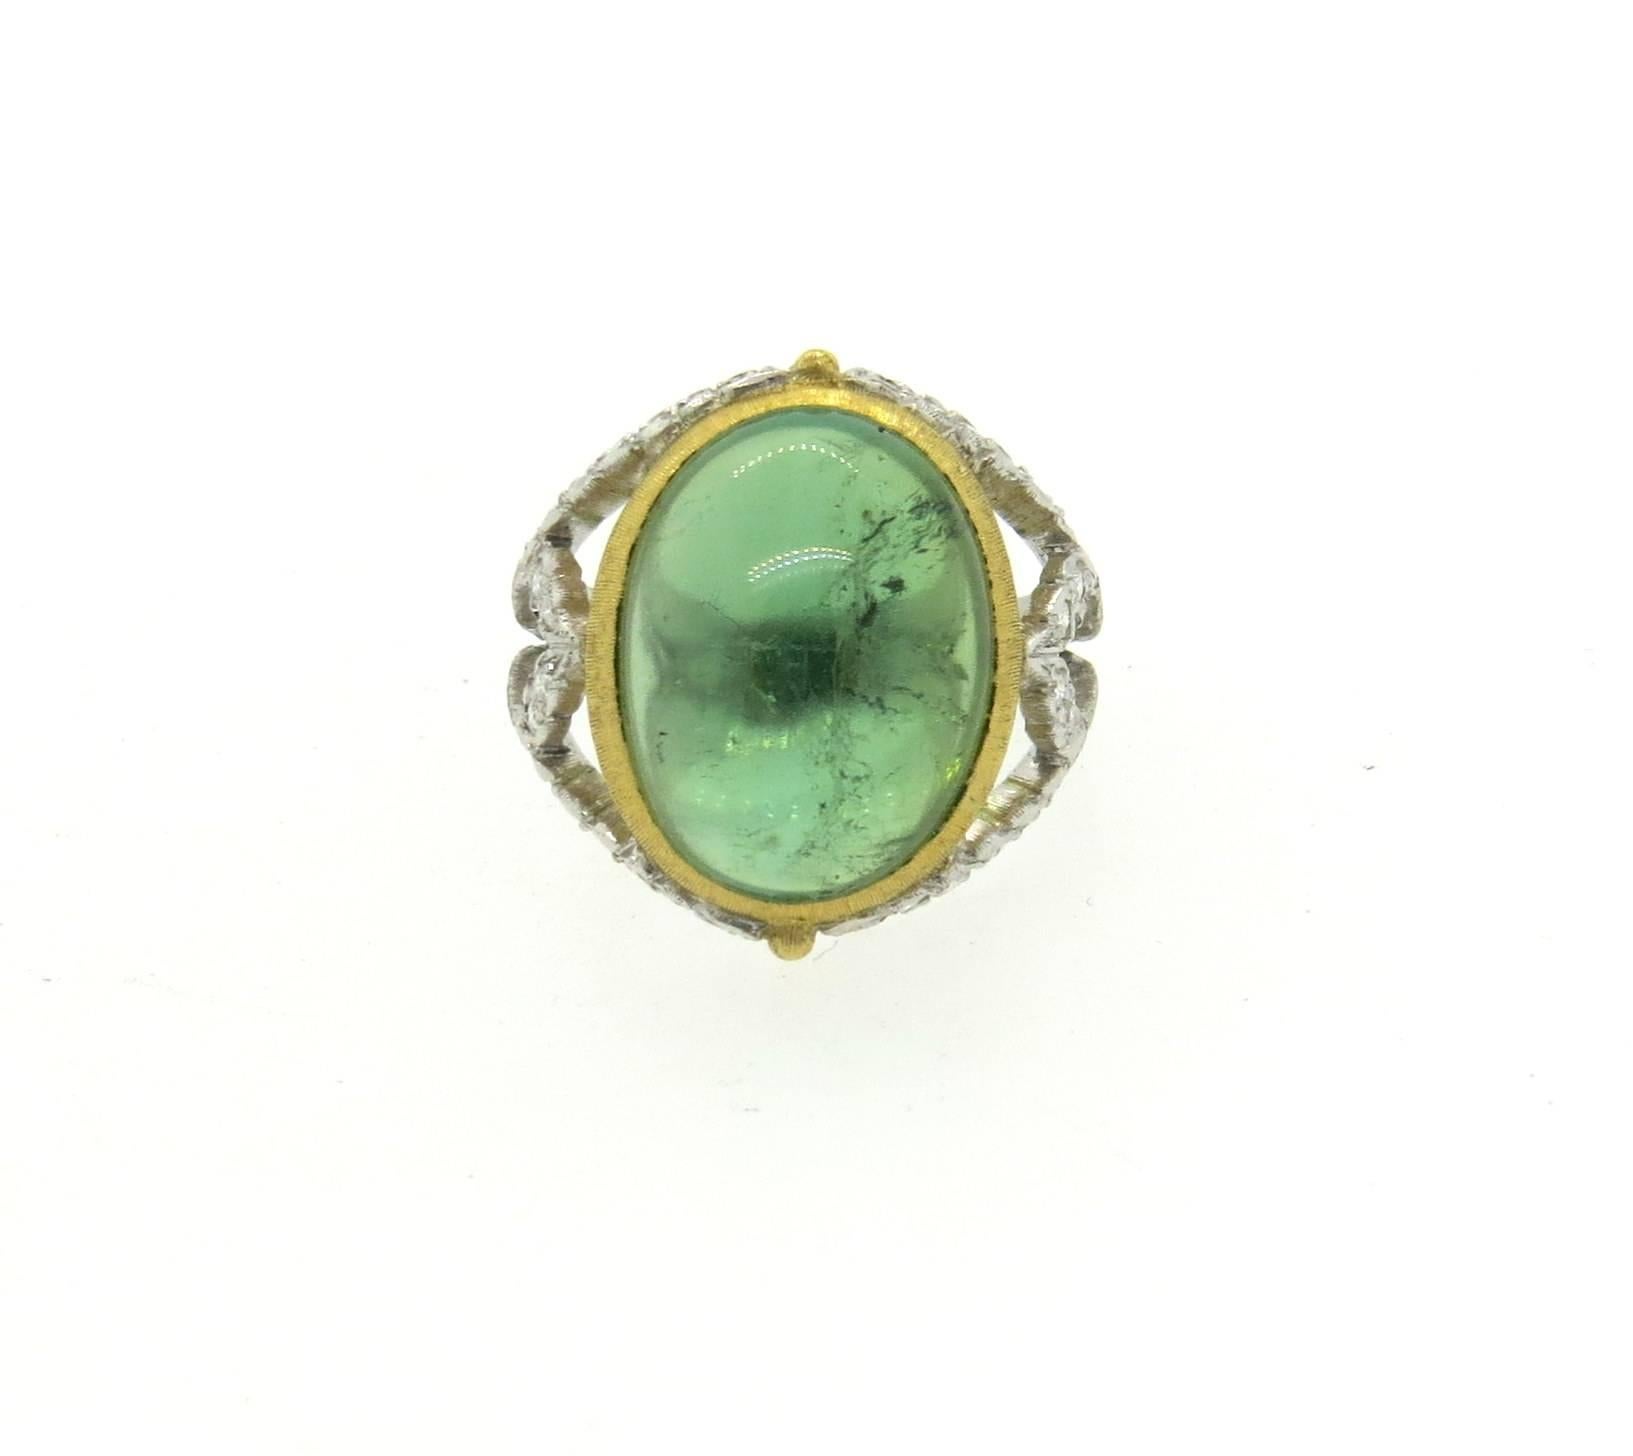 18k yellow and white gold ring, crafted by Buccellati, crafted with an approximately 13-13.5ct green tourmaline cabochon, surrounded with approx. 0.50ctw in diamonds. Ring is a size 6 1/4m ring top is 19mm wide. Marked: Buccellati,18Kt, Italy.